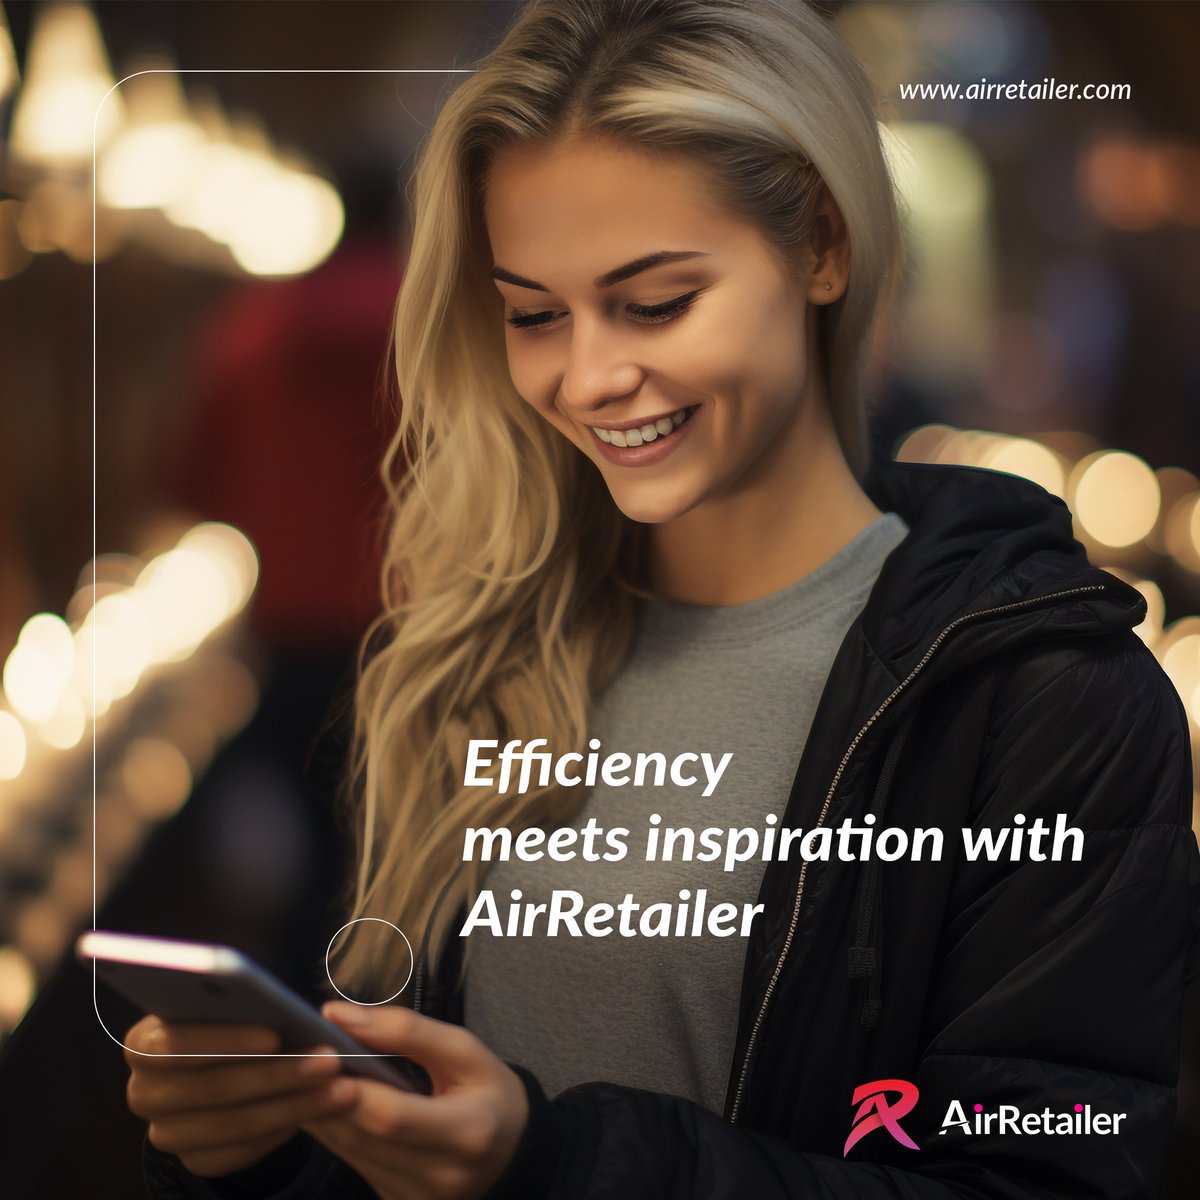 Effortlessly streamline multiple orders with AirRetailer, simplifying your travel goals.
.
.
#AirRetailer #corporatetravelmanagement #corporatetravel #businesstravel #travelsoftware #businesstrip #software #corporatetraveltool #flightcorporatebooking #effortlessbusinesstravel